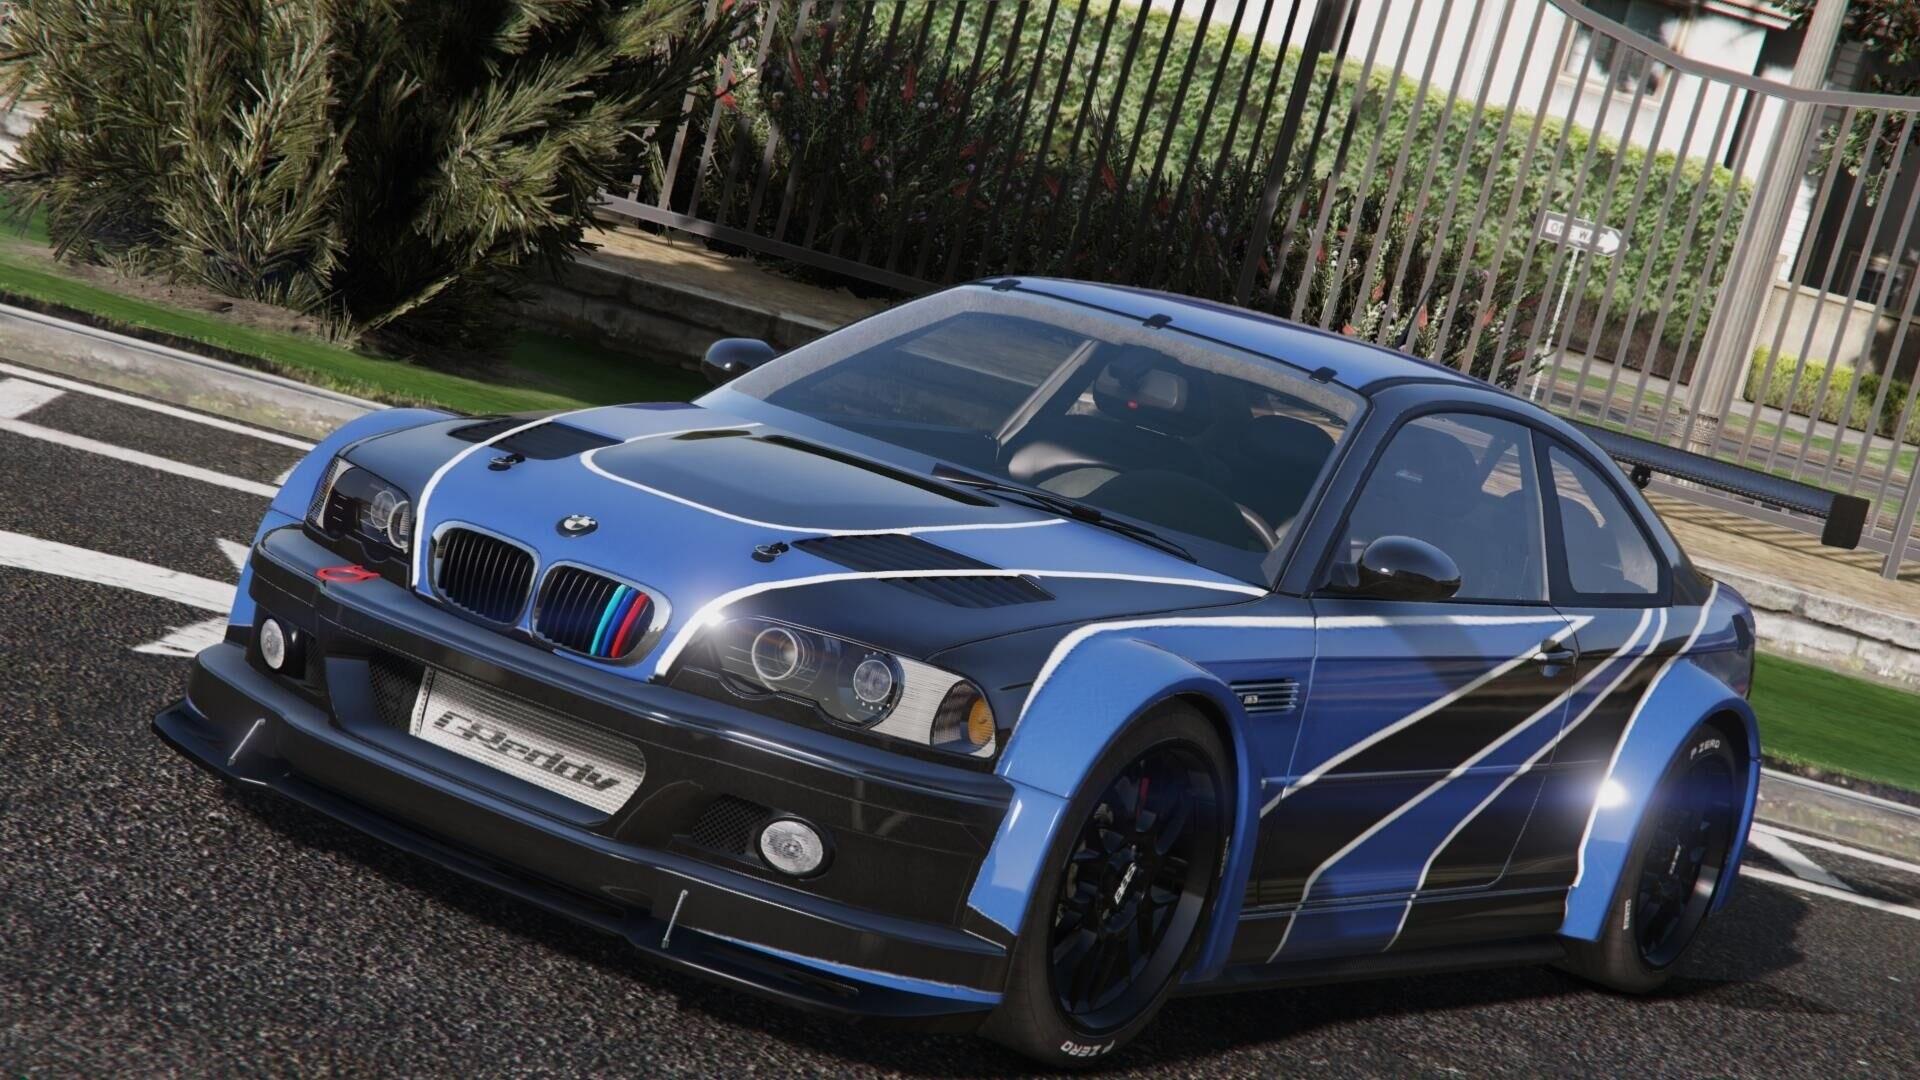 Bmw M3 Gtr Need For Speed Wallpaper